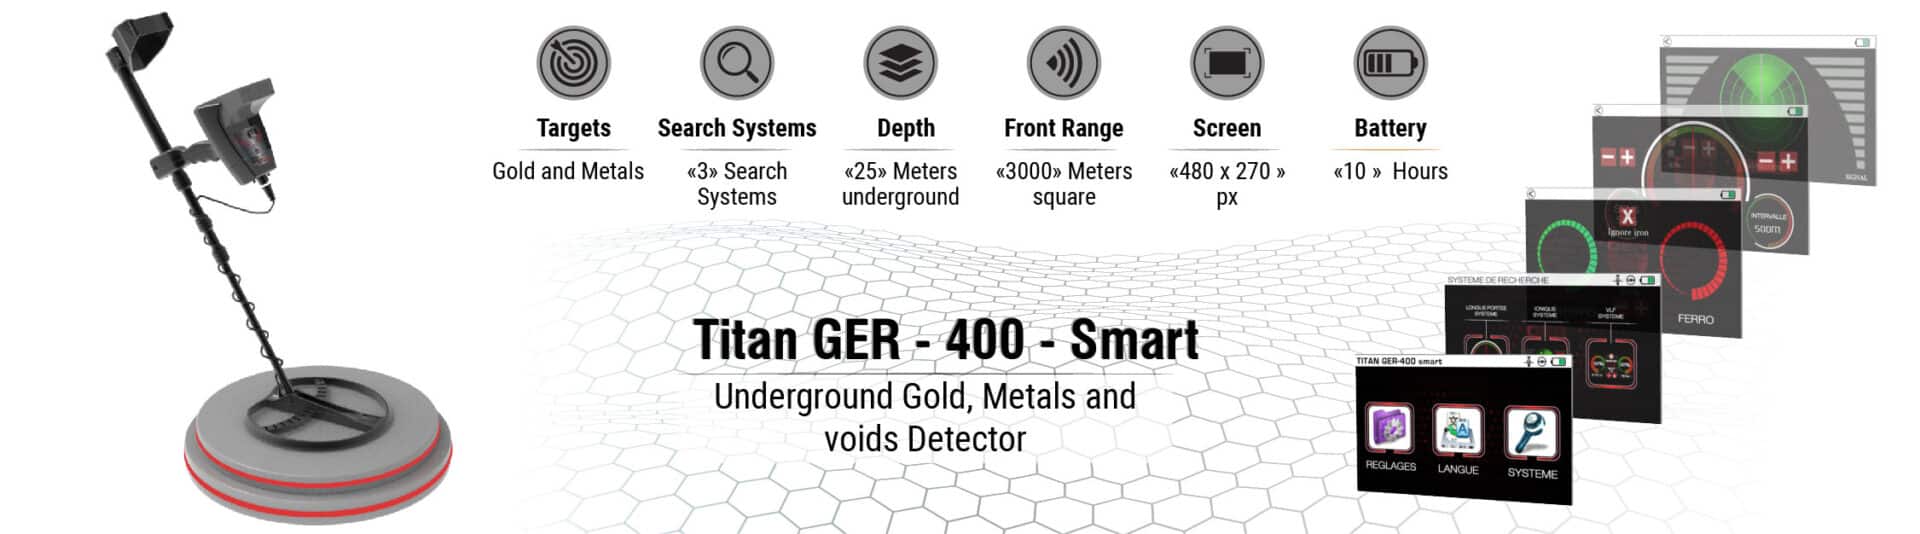 TITAN 400 SMART device, with a completely new design, besides the device is the first of its kind in the world.